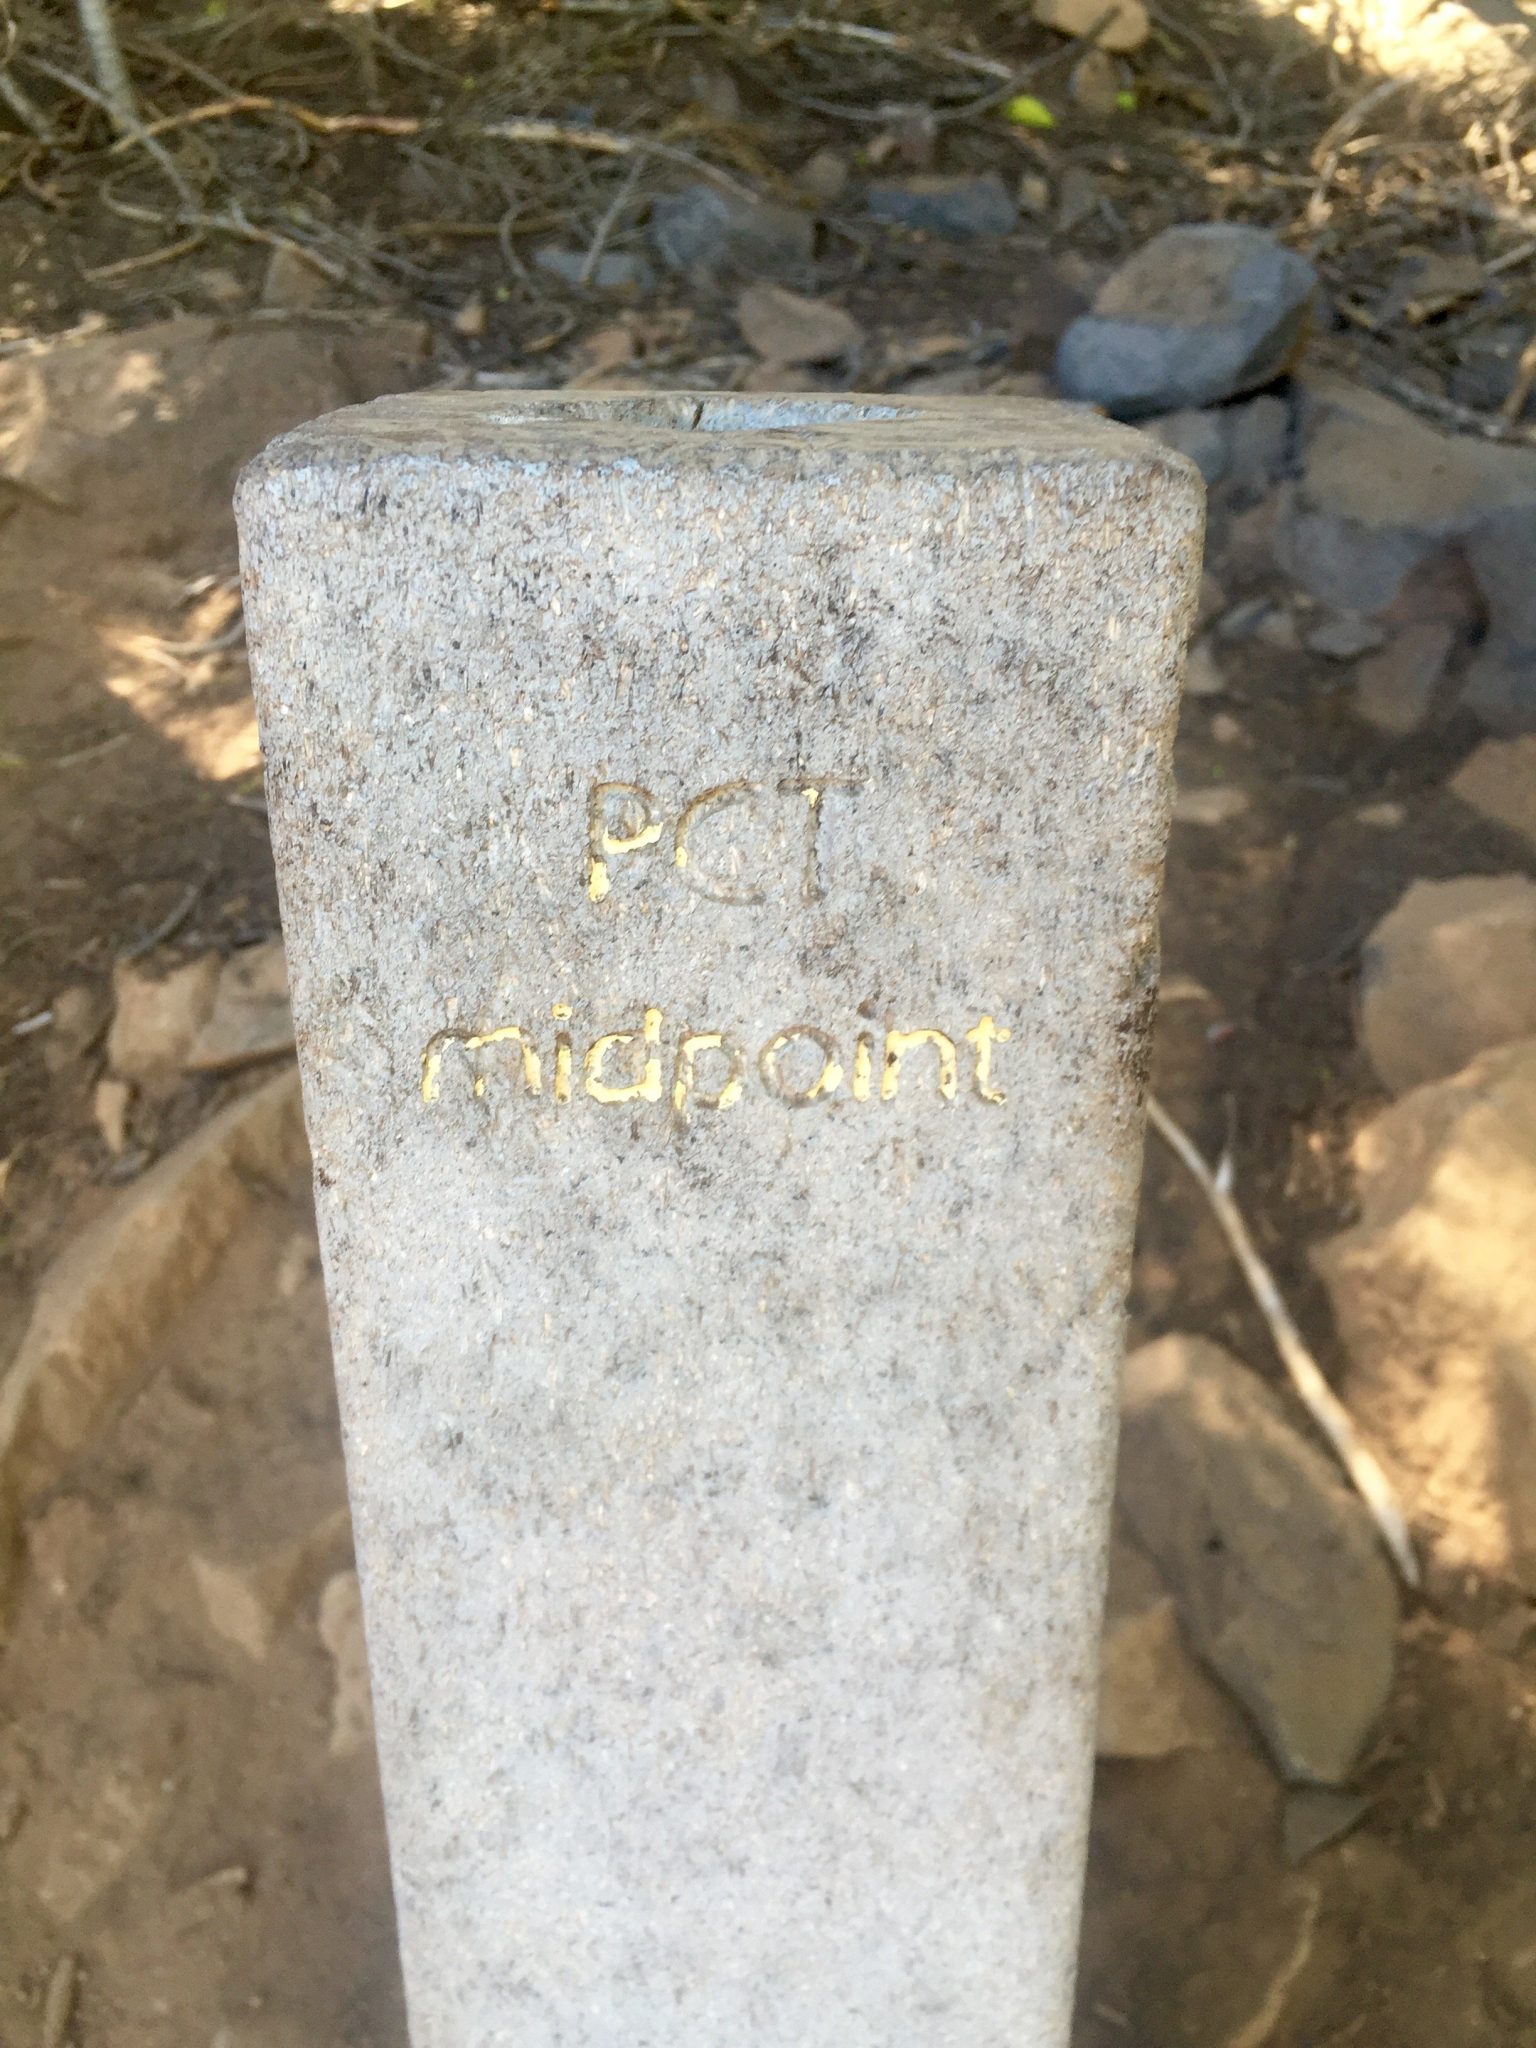 Stone post marking the PCT halfway point